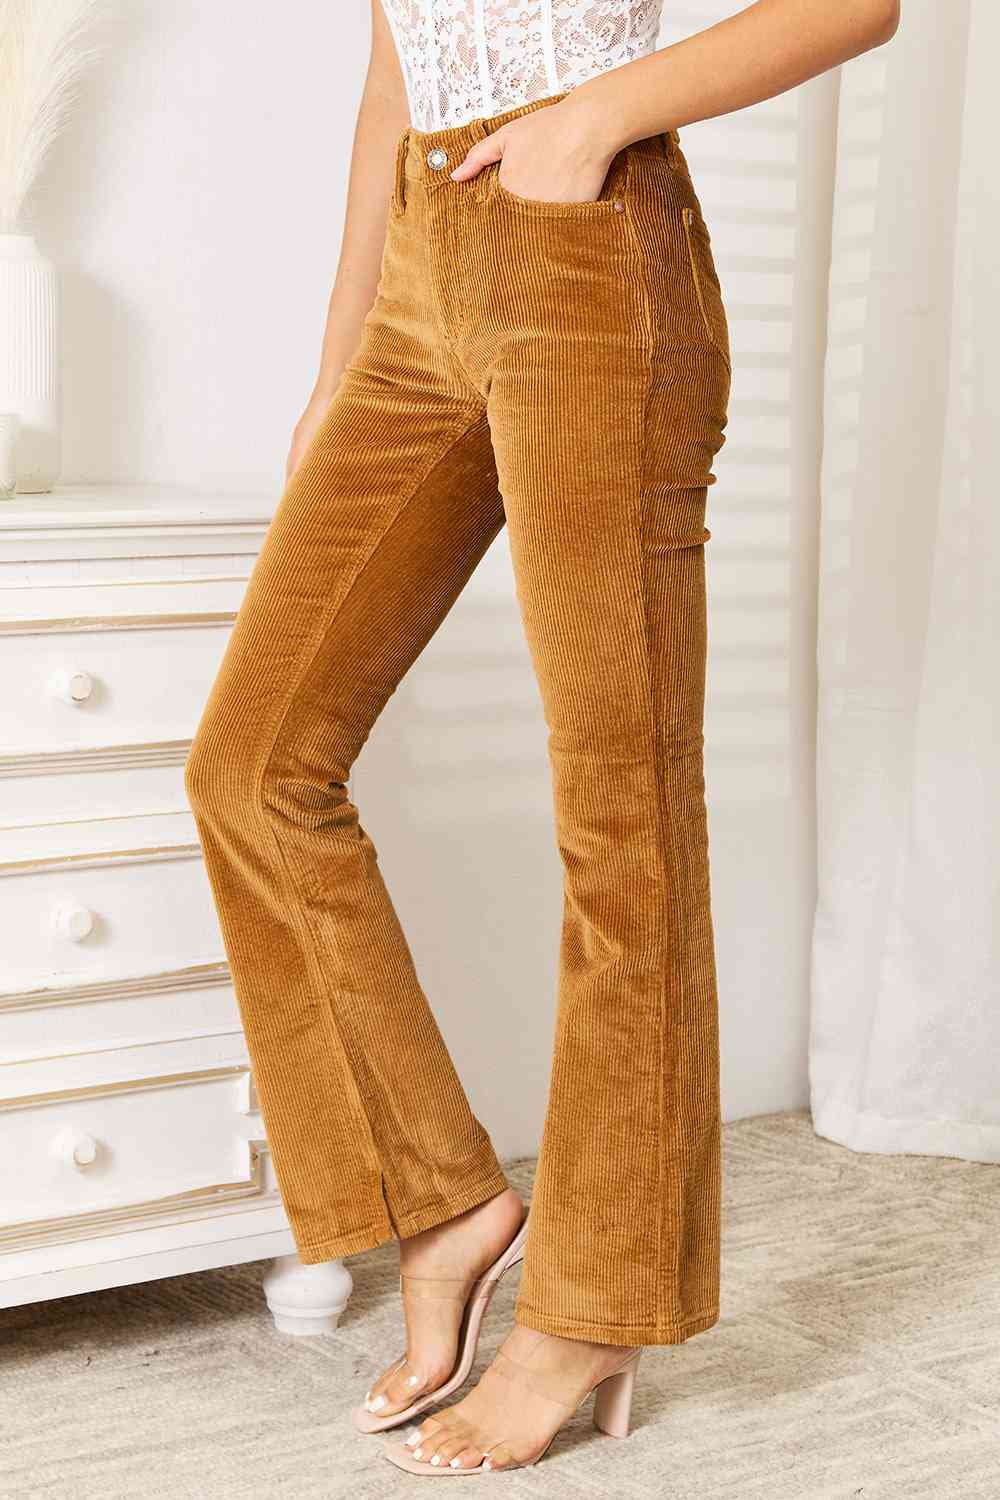 Judy Blue Mid Rise Corduroy Pants in  Camel